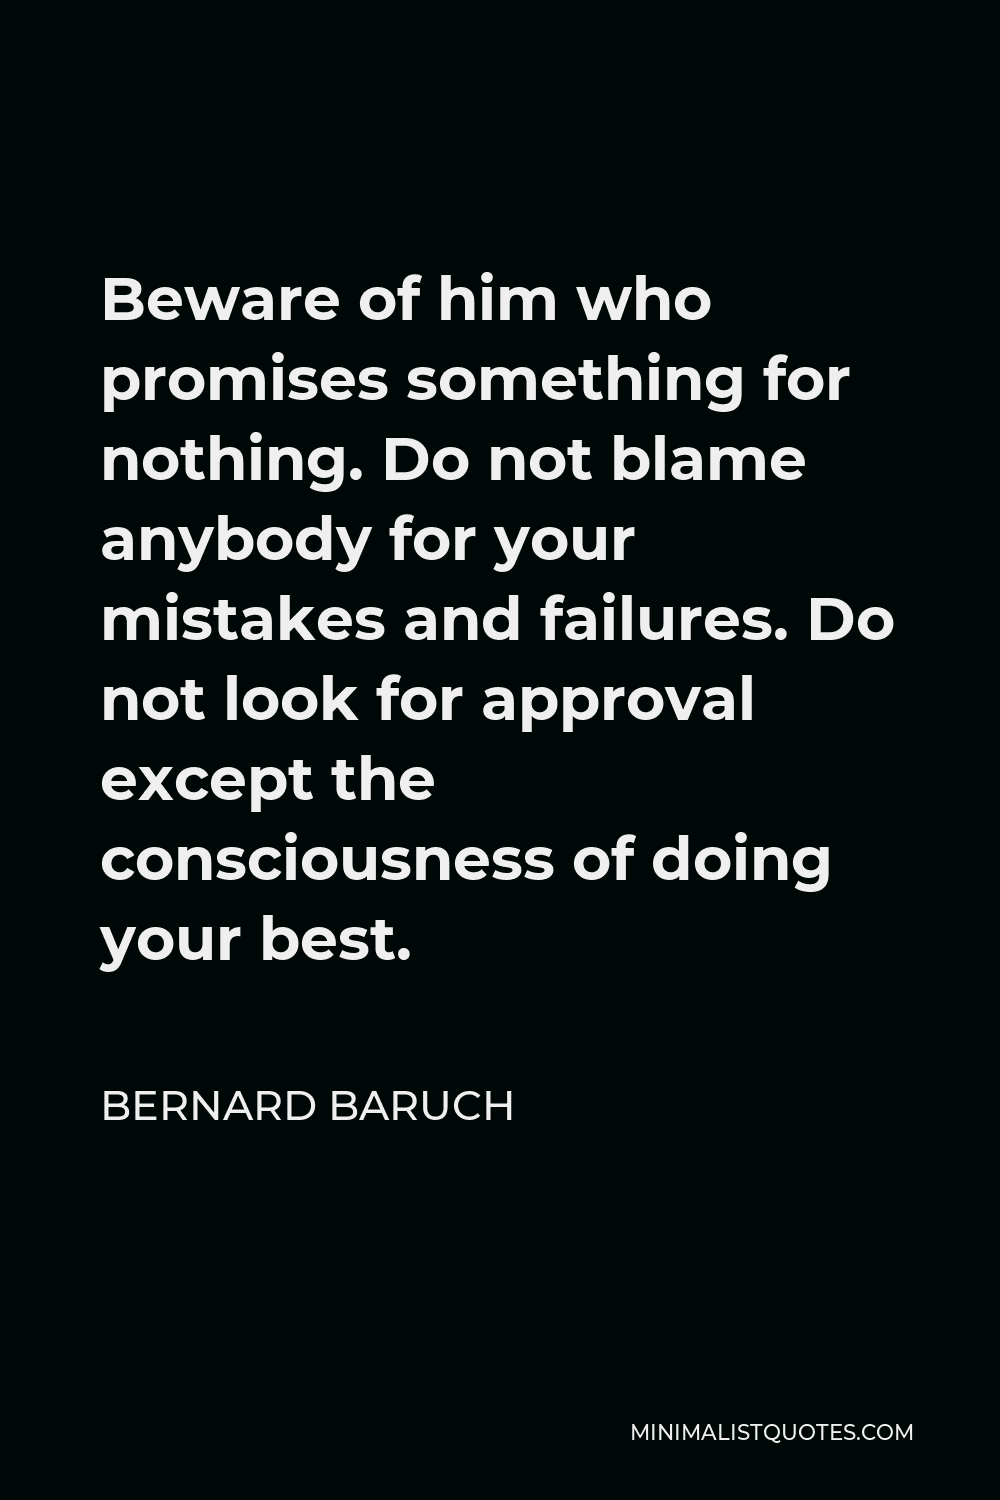 Bernard Baruch Quote - Beware of him who promises something for nothing. Do not blame anybody for your mistakes and failures. Do not look for approval except the consciousness of doing your best.